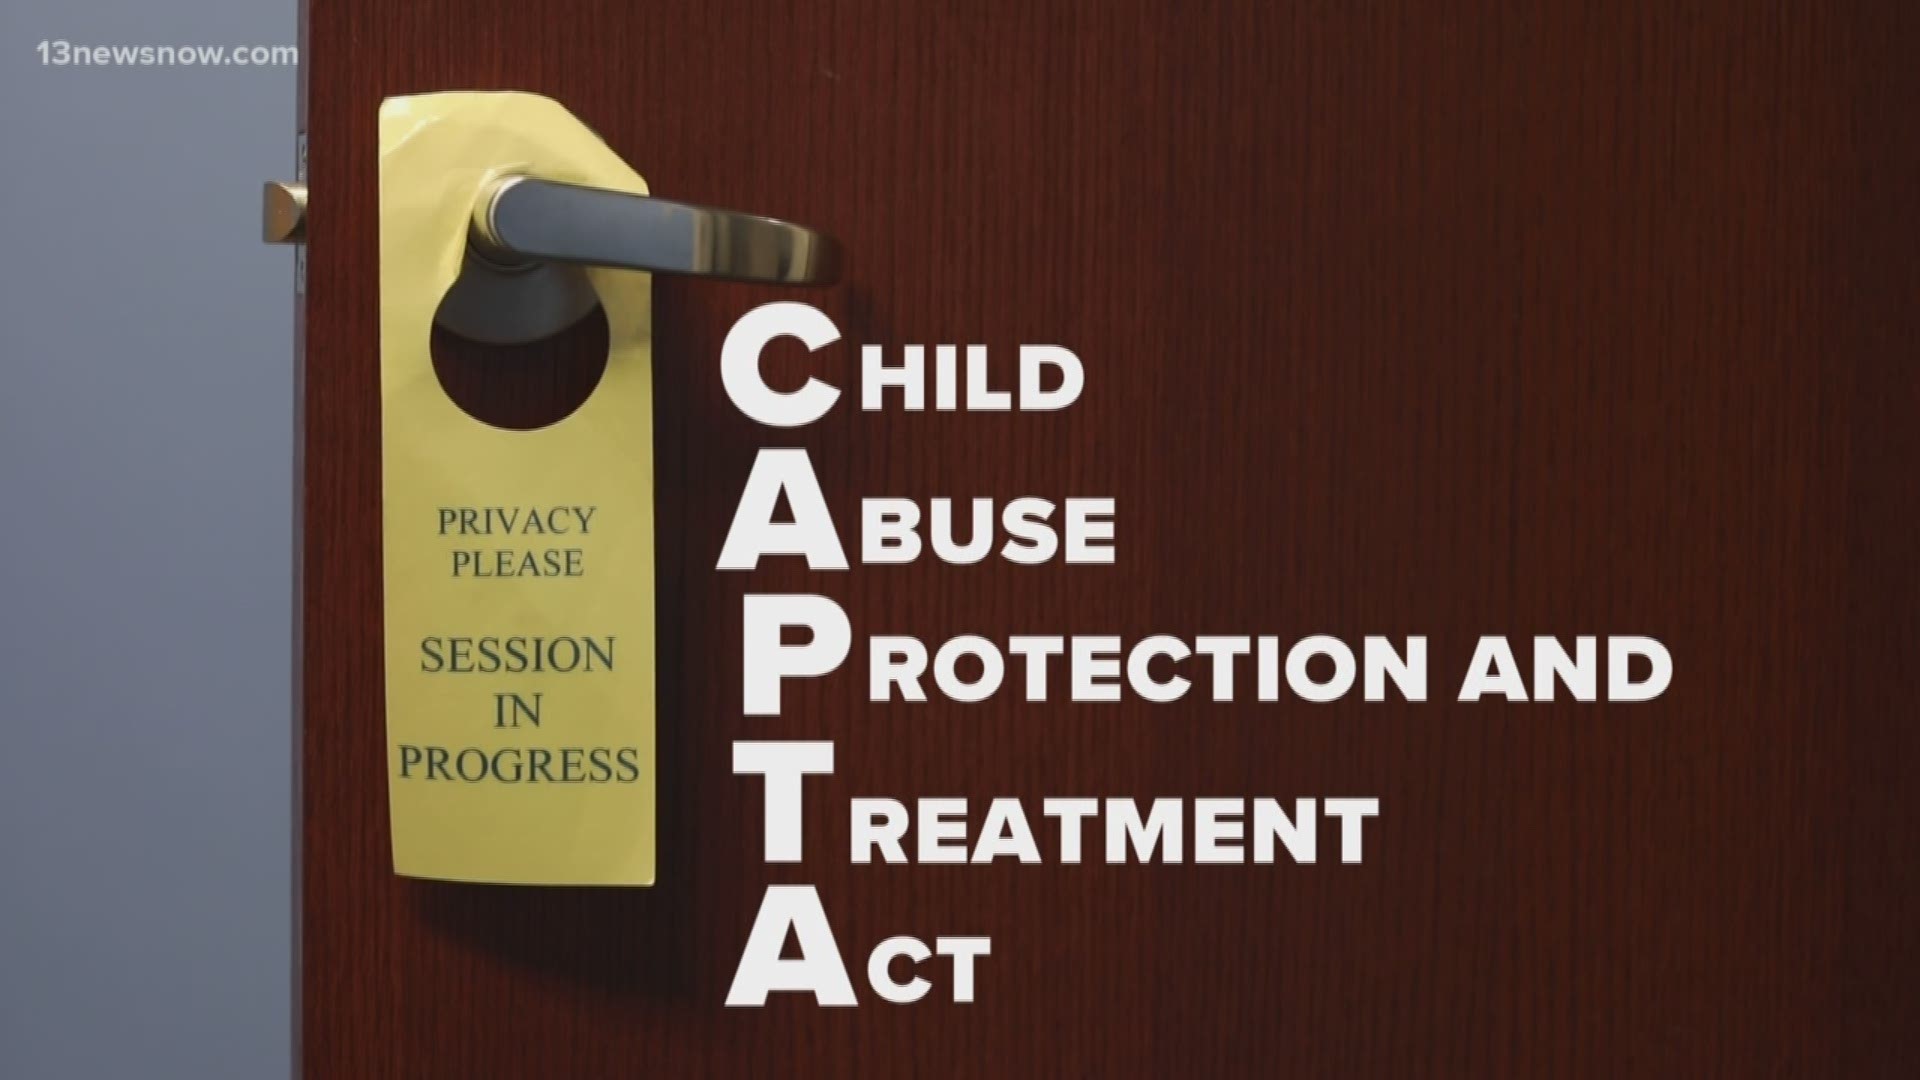 A U.S. Congressional Committee passed legislation Wednesday that would strengthen the existing Child Abuse Prevention and Treatment Act (CAPTA) and create a national system in which states would be required to share its child abuse registries. It would also designate more funds for child abuse prevention and treatment nationwide.